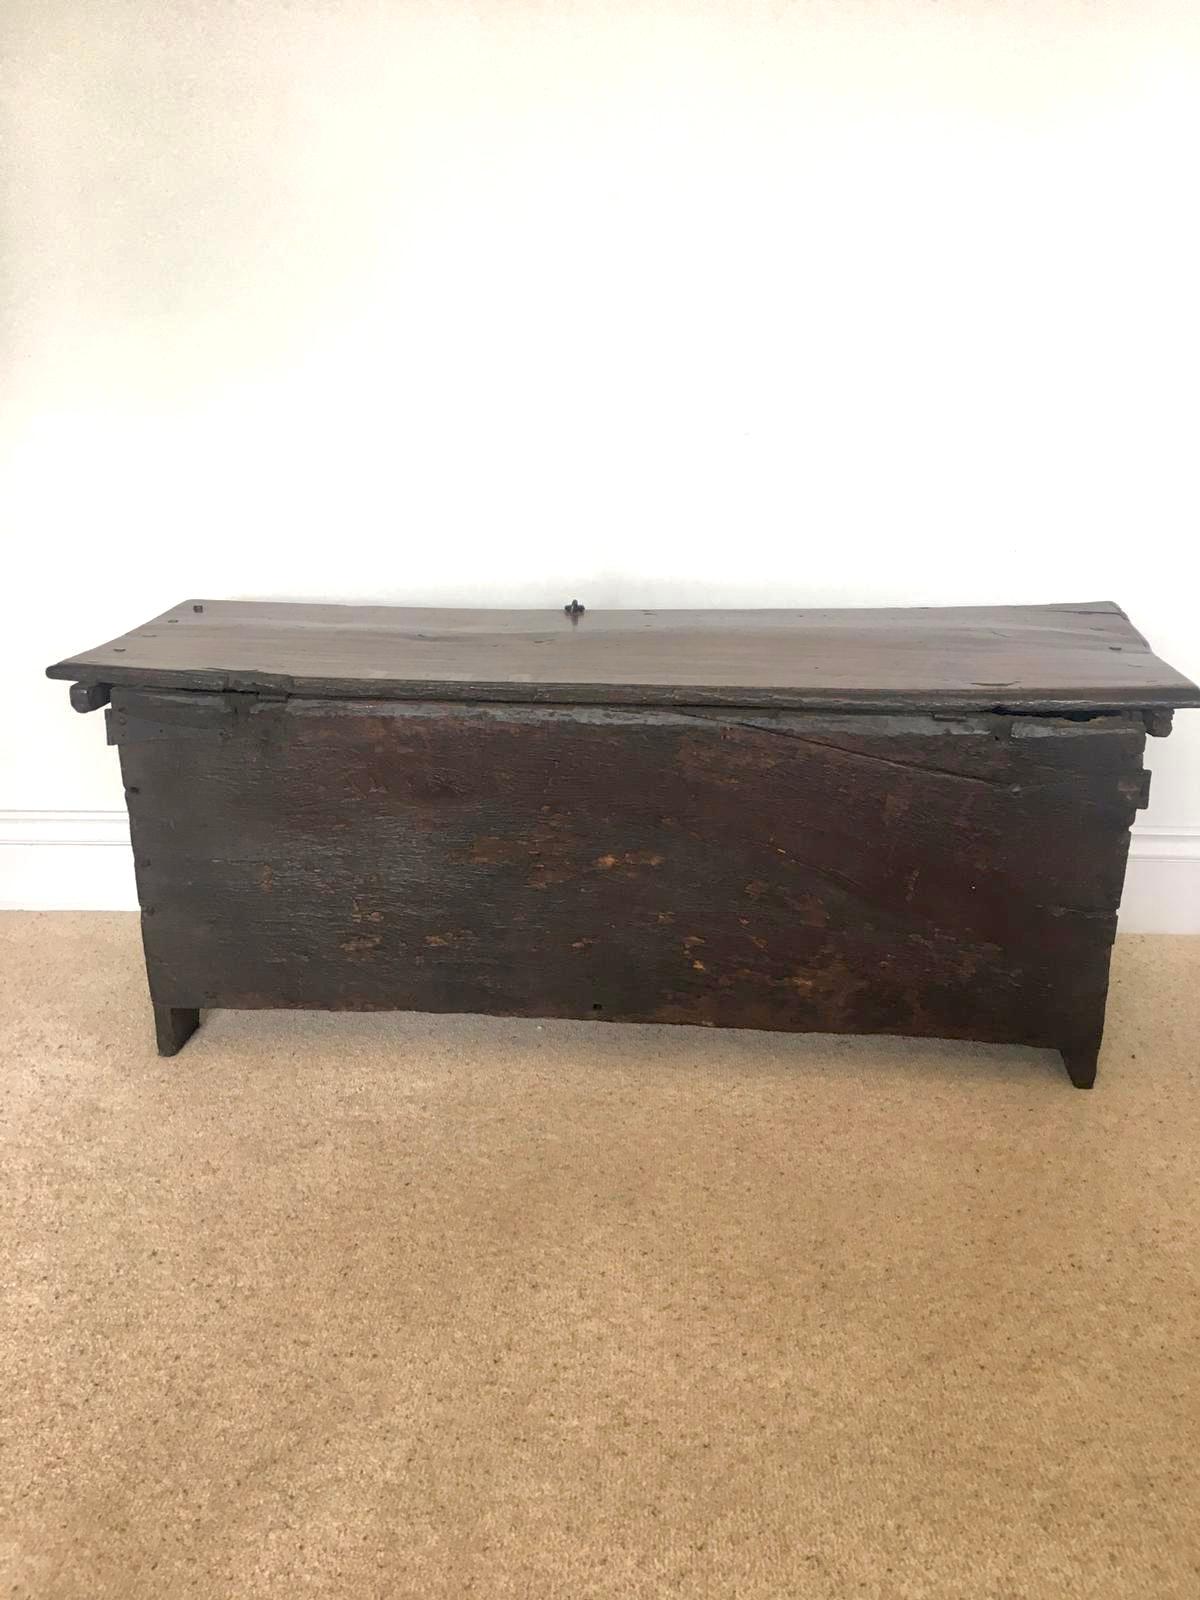 18th century antique carved oak coffer having a lift up plank top lid with a moulded edge opening to reveal a storage compartment. It boasts a quality carved frieze with an original iron lock plate, three magnificently carved oak panels depicting